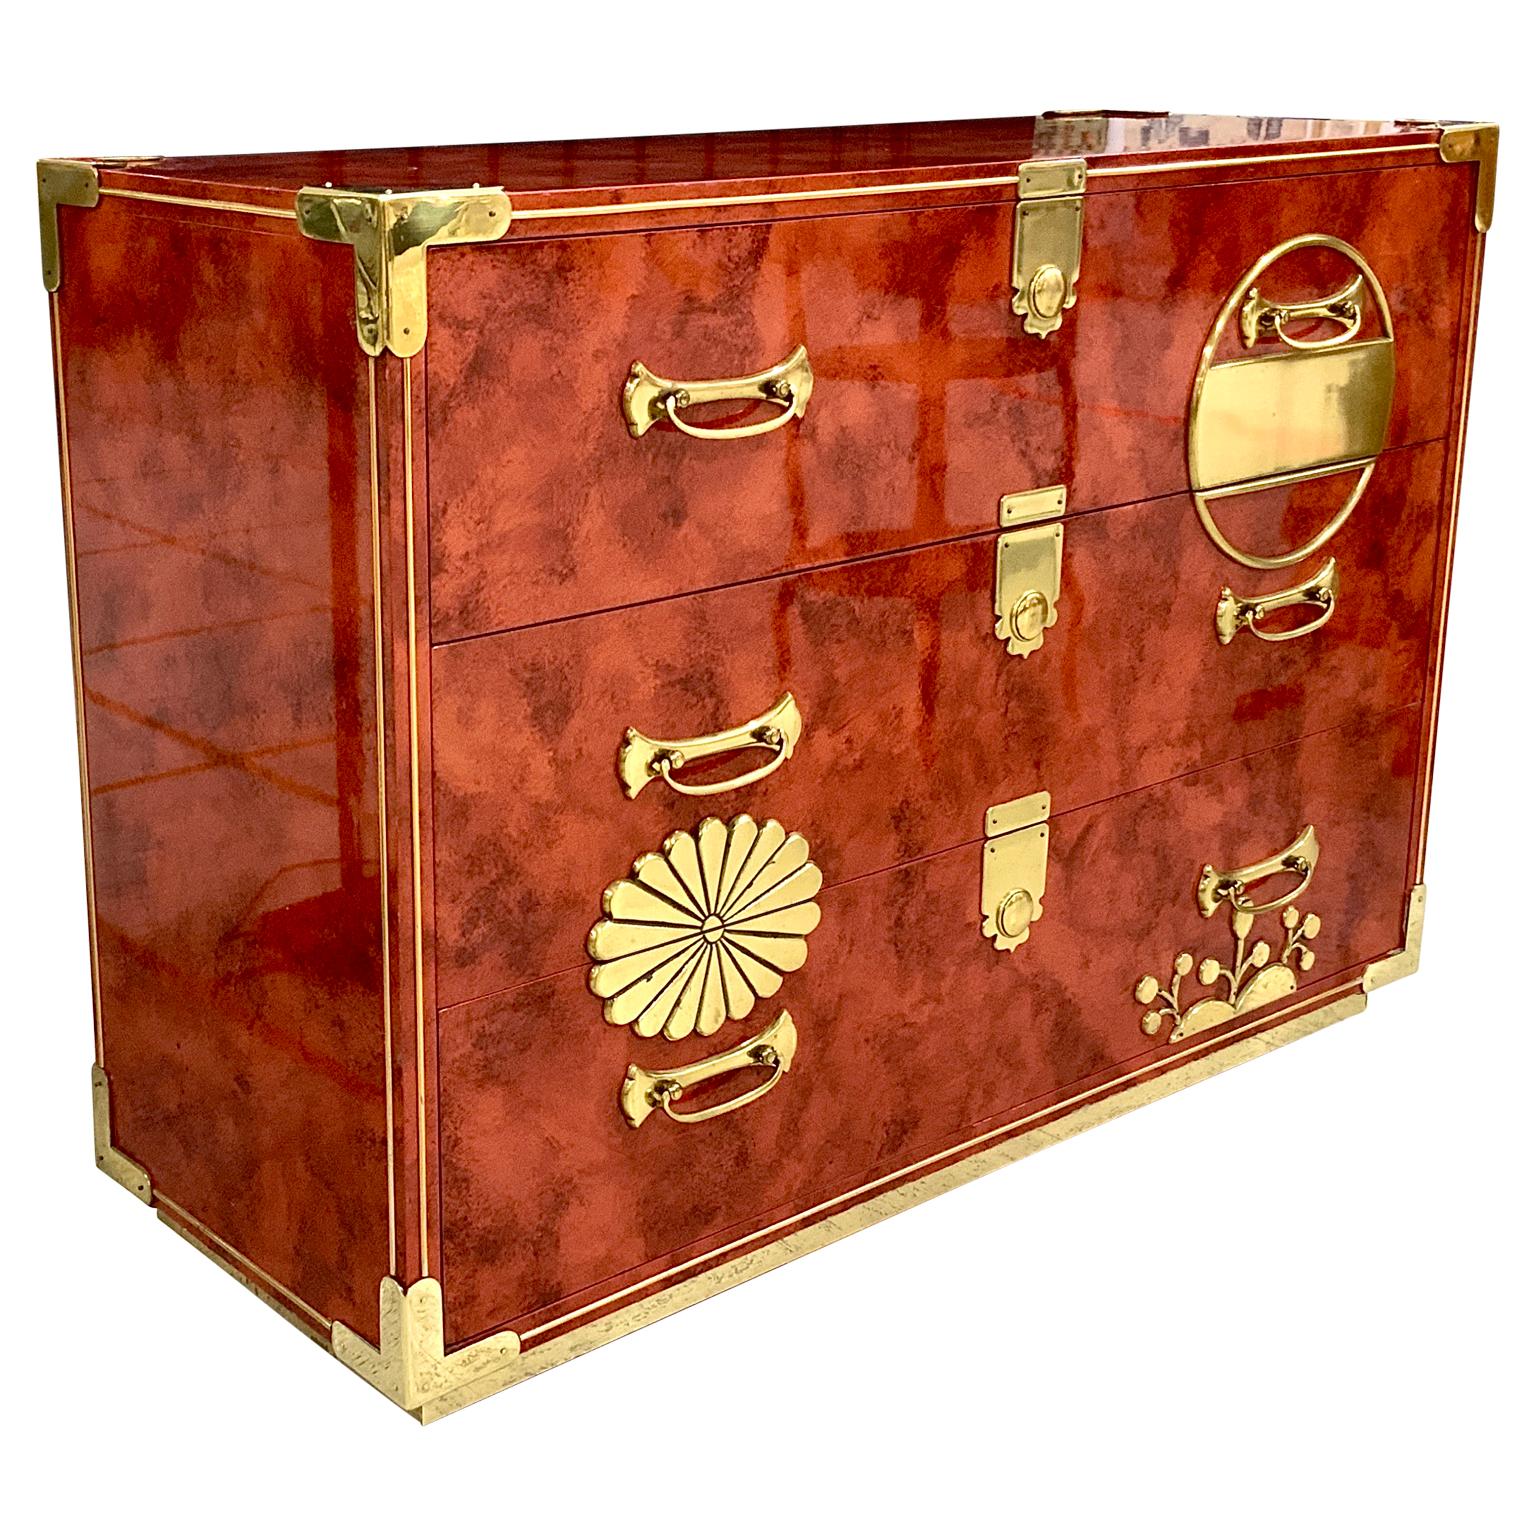 20th Century American Mid-Century Mastercraft Asian Modern Brass Chest of Drawers For Sale